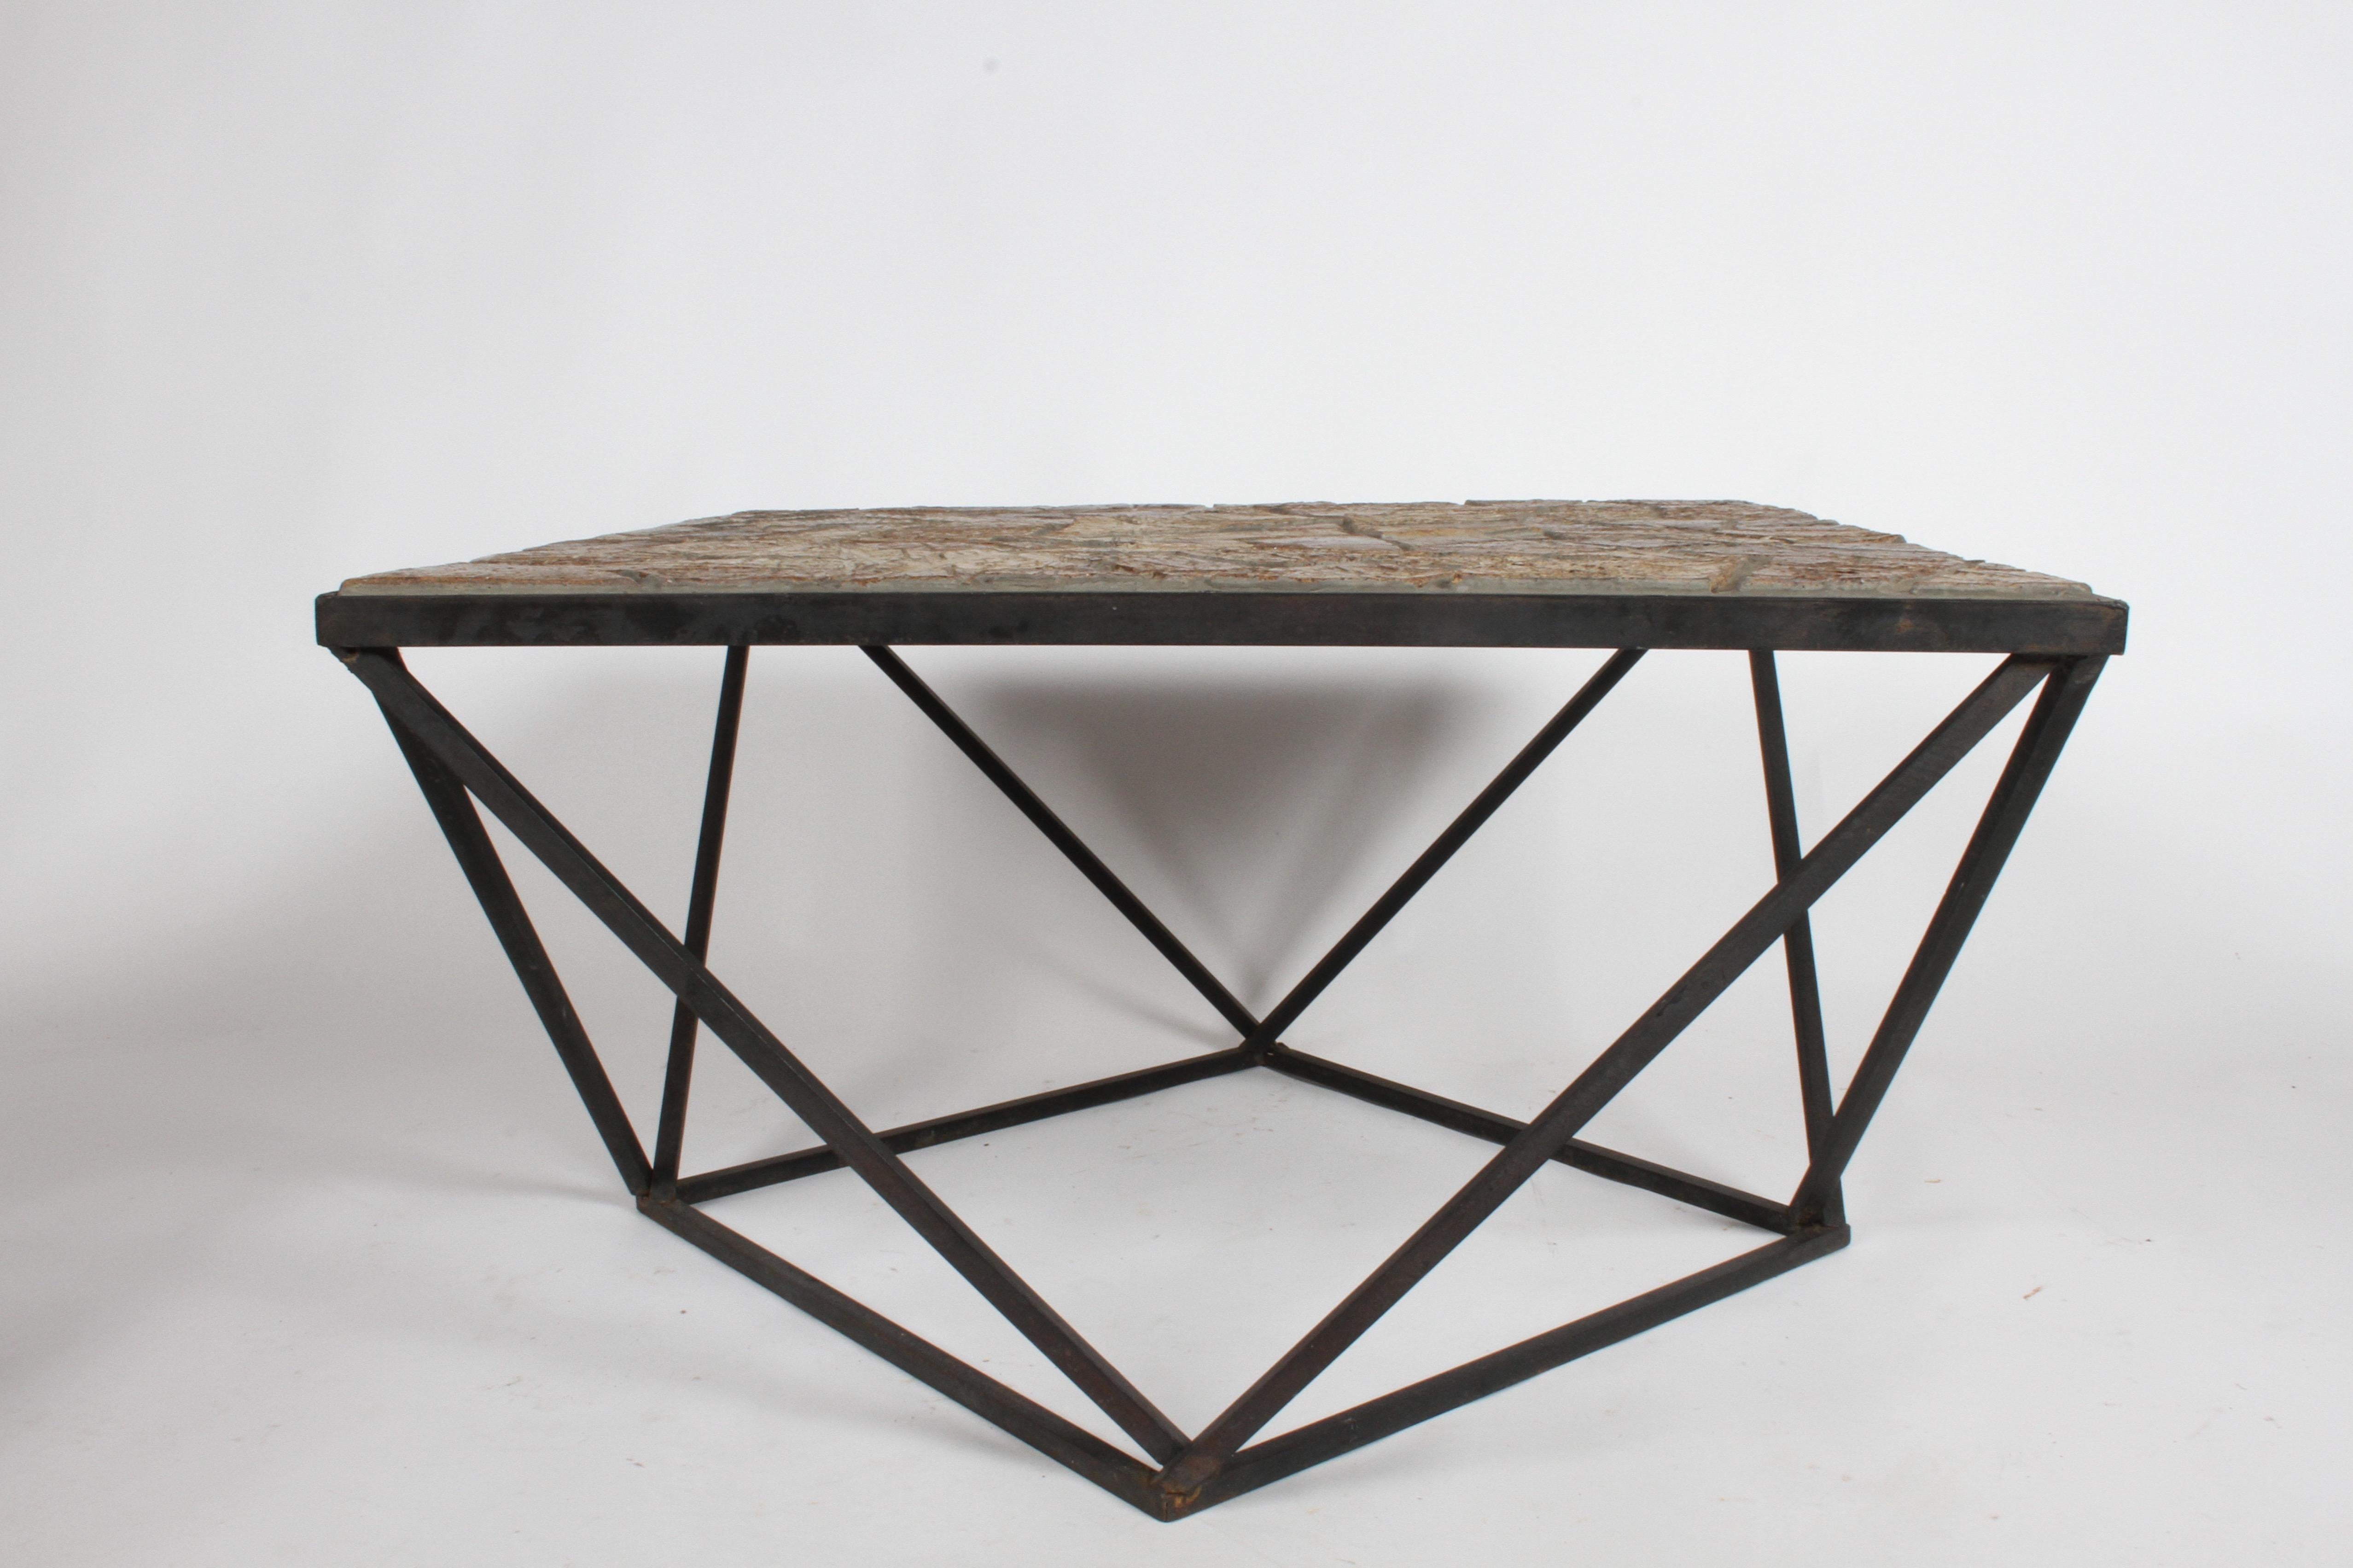 J. Ormond Sanderson Straw Valley Pottery Mid-Century Modern Cubist Coffee Table  In Good Condition For Sale In St. Louis, MO